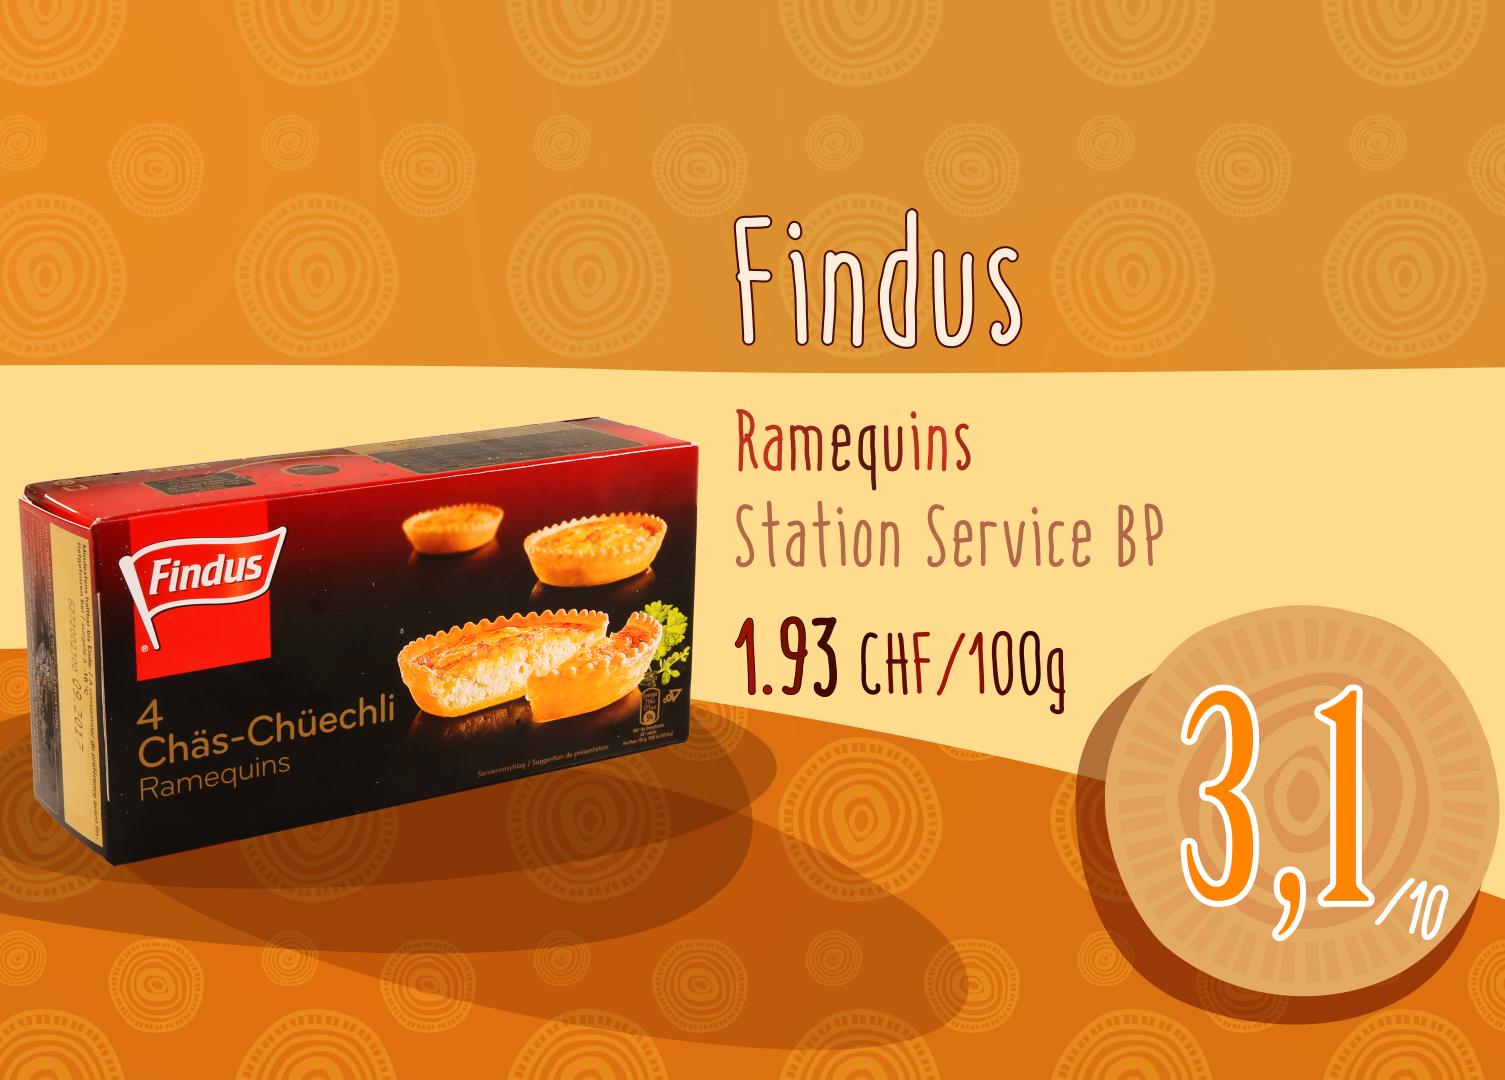 Ramequins Findus - Station Service BP.